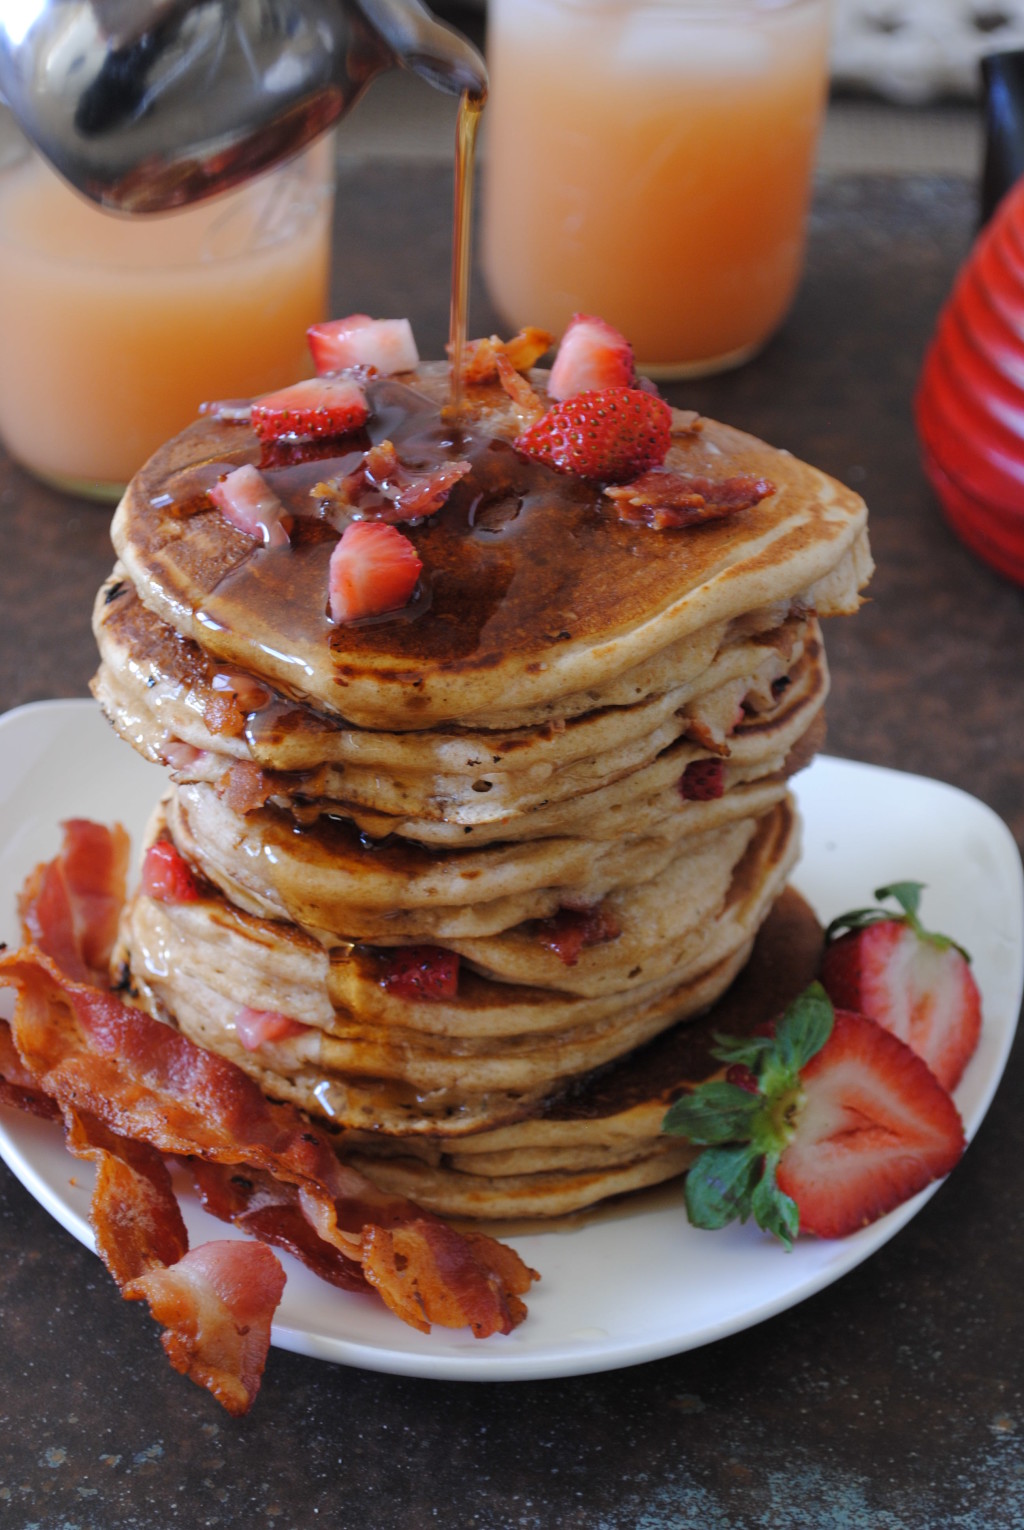 Bacon and Strawberry Stuffed Pancakes